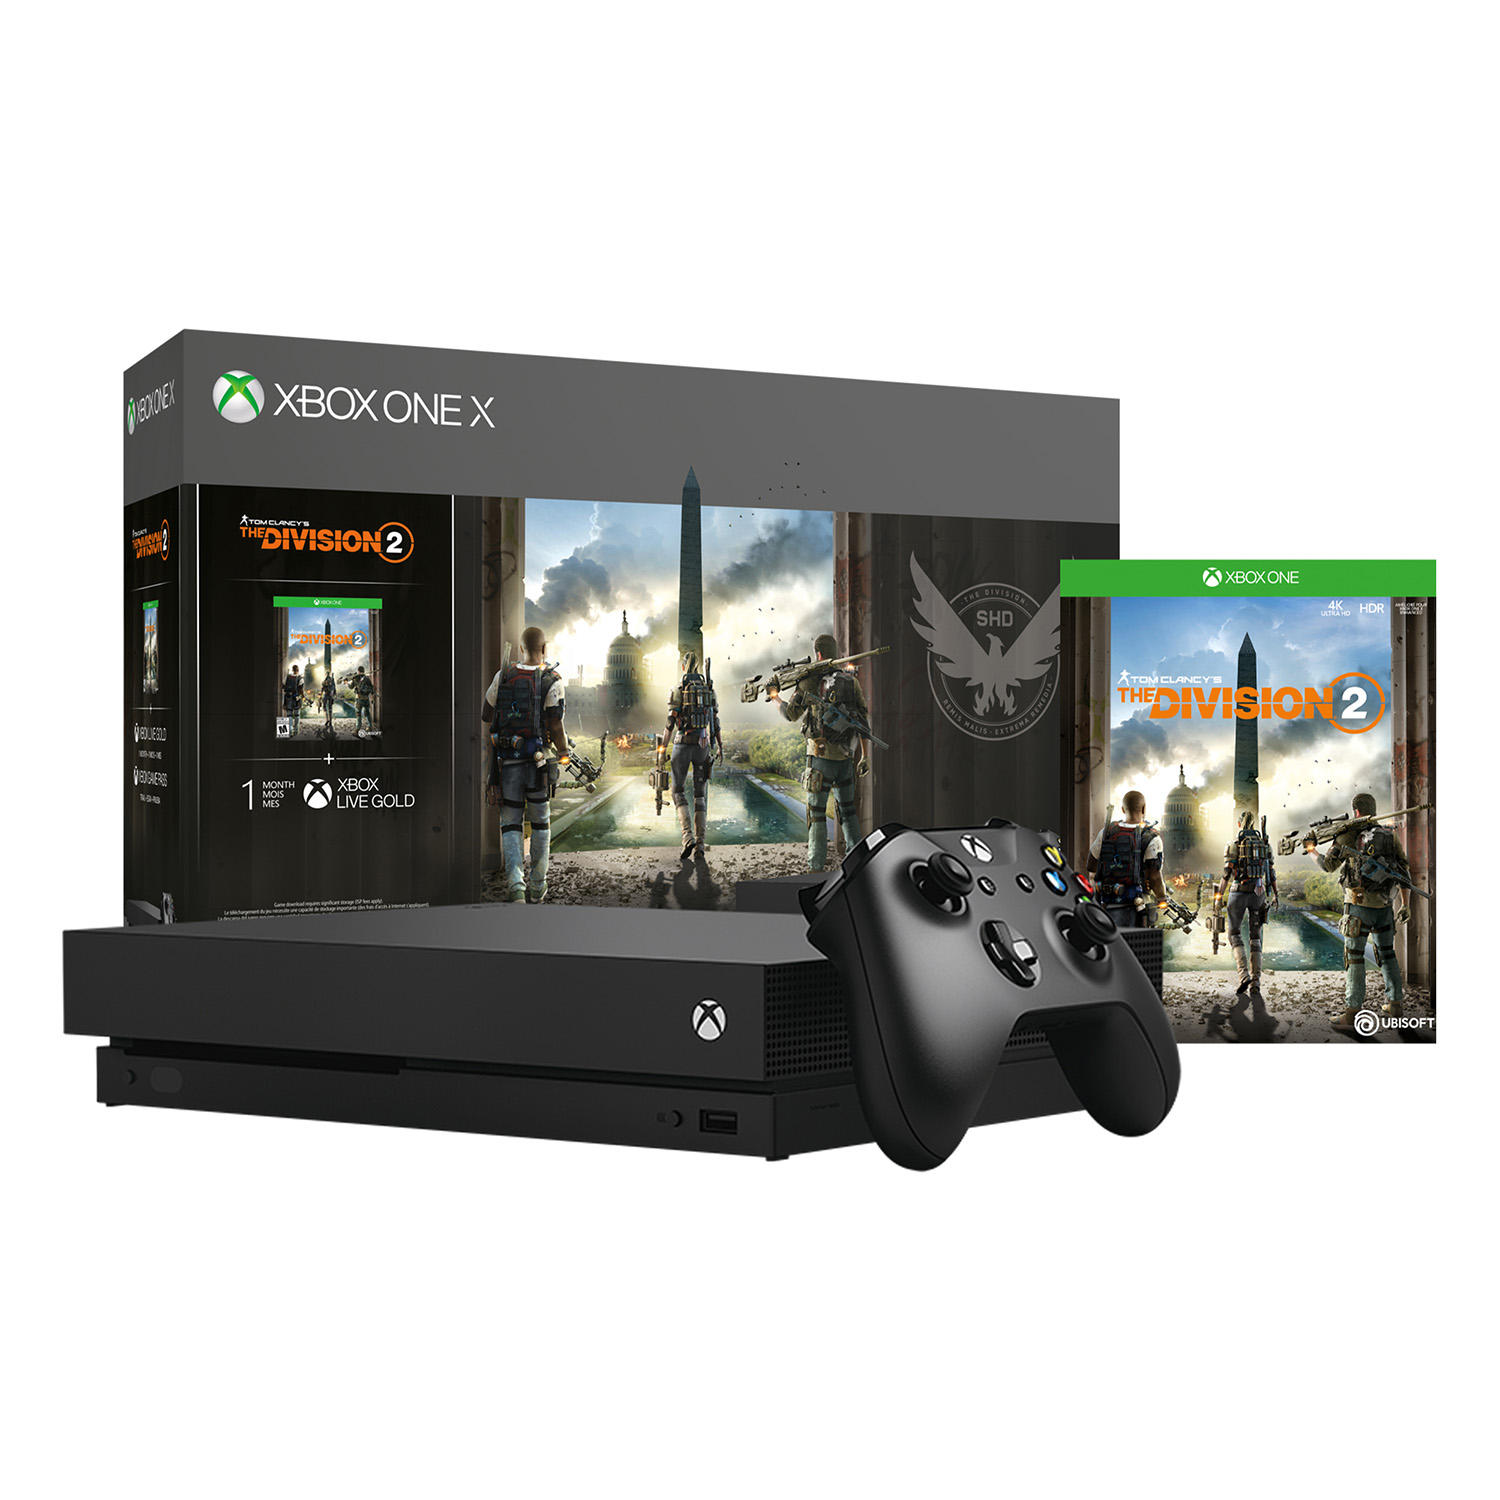 Xbox One X Tom Clancy’s Division 2 Console and Game Bundle